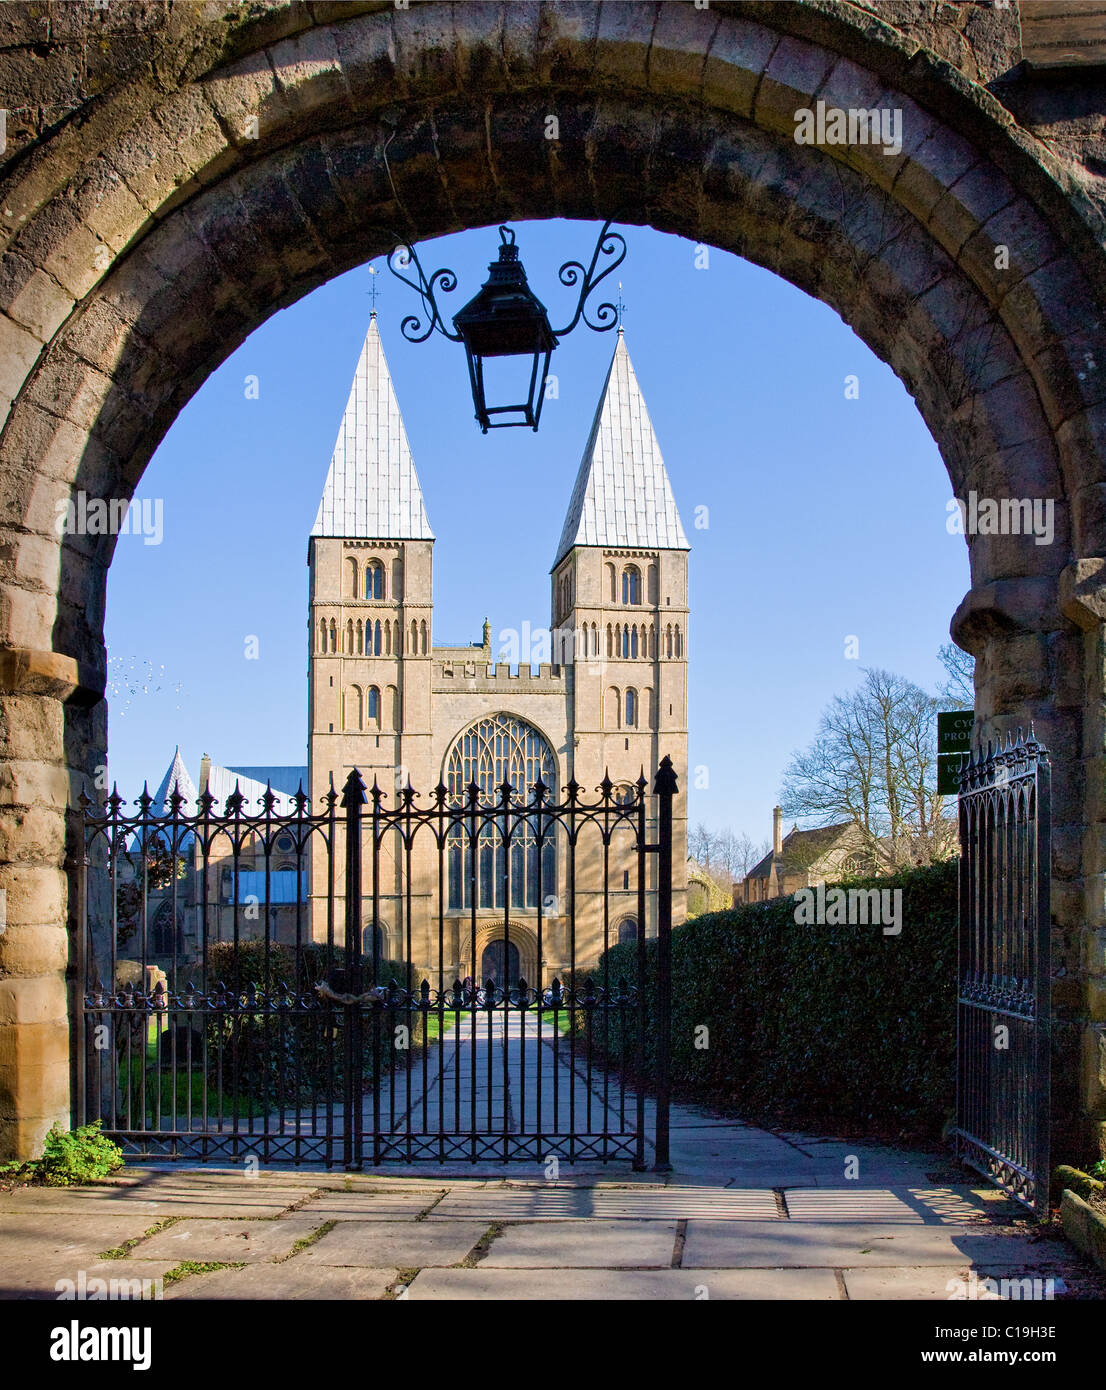 Southwell Minster in Nottinghamshire with unusual pepper pot towers glimpsed through the romanesque entrance gateway Stock Photo